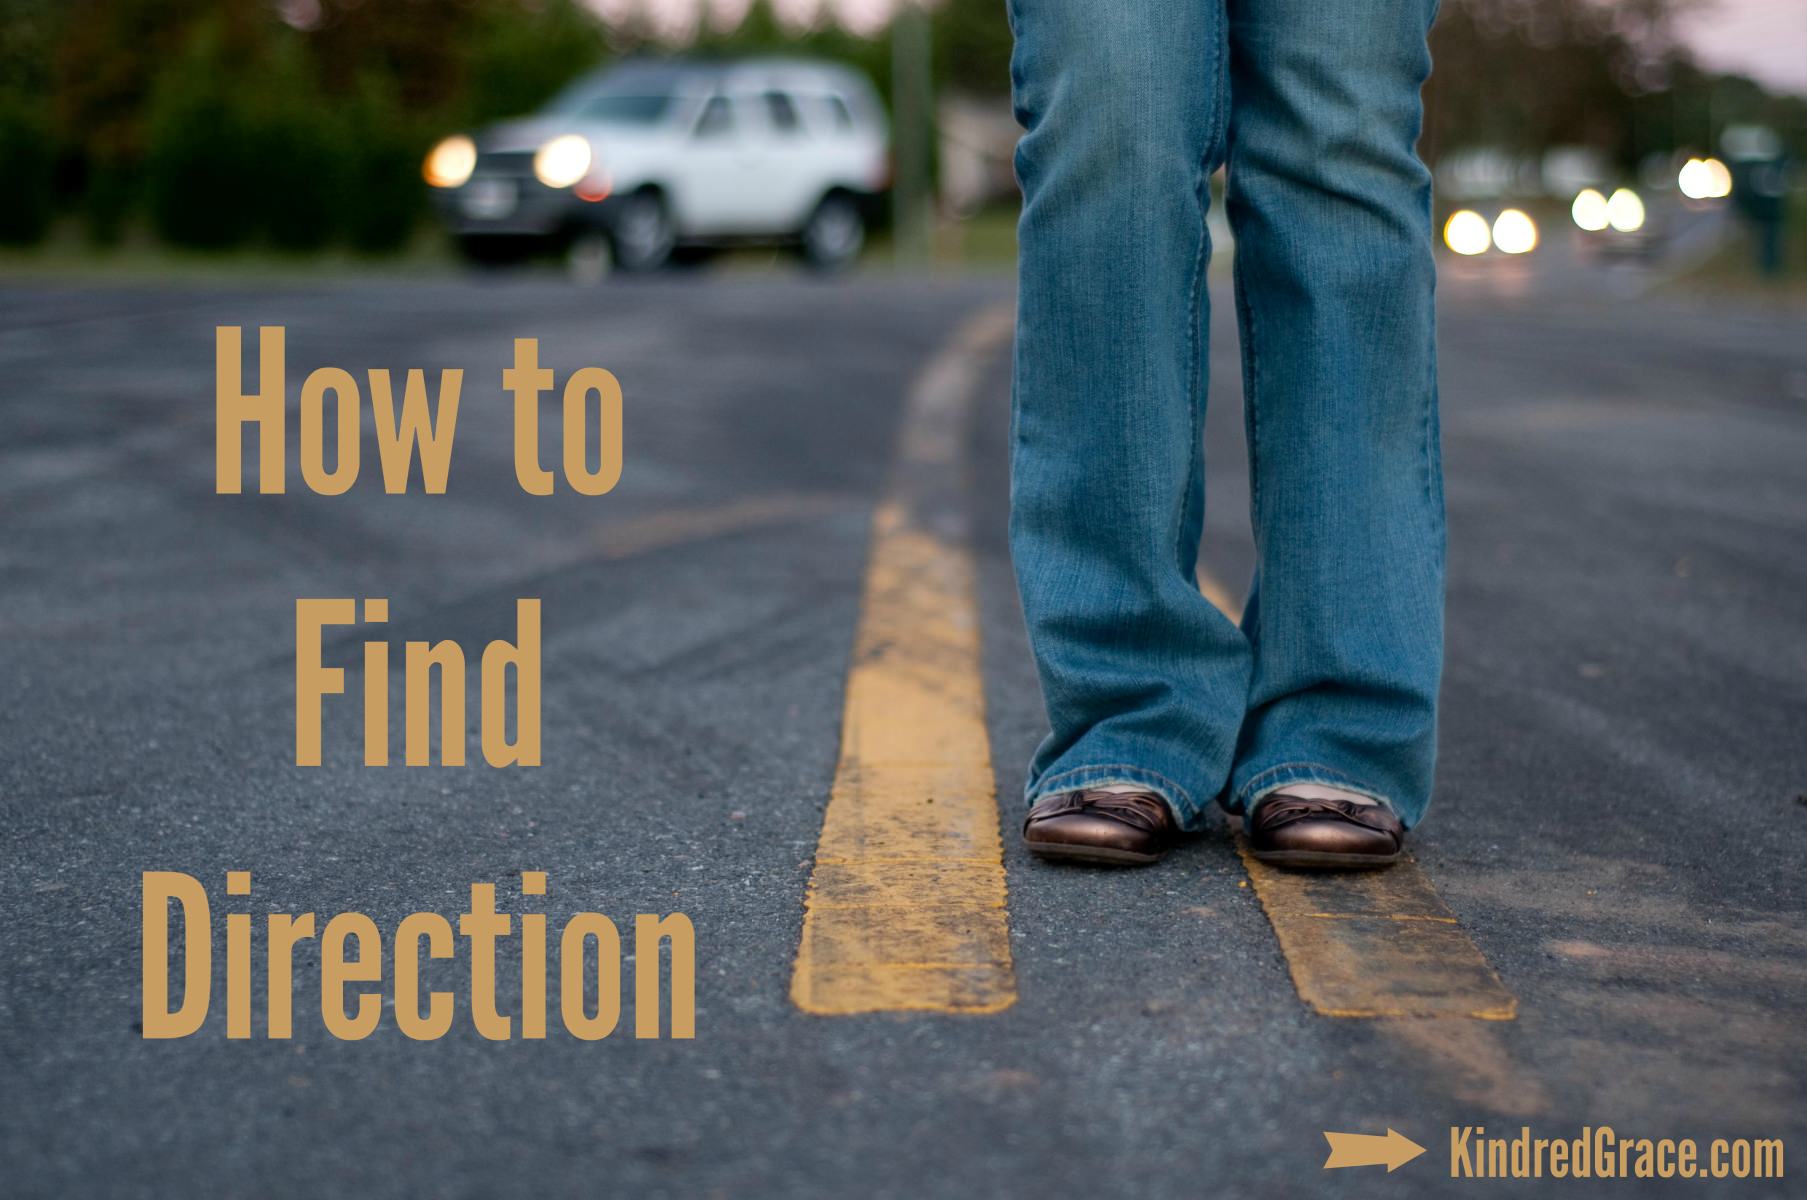 How to Find Direction